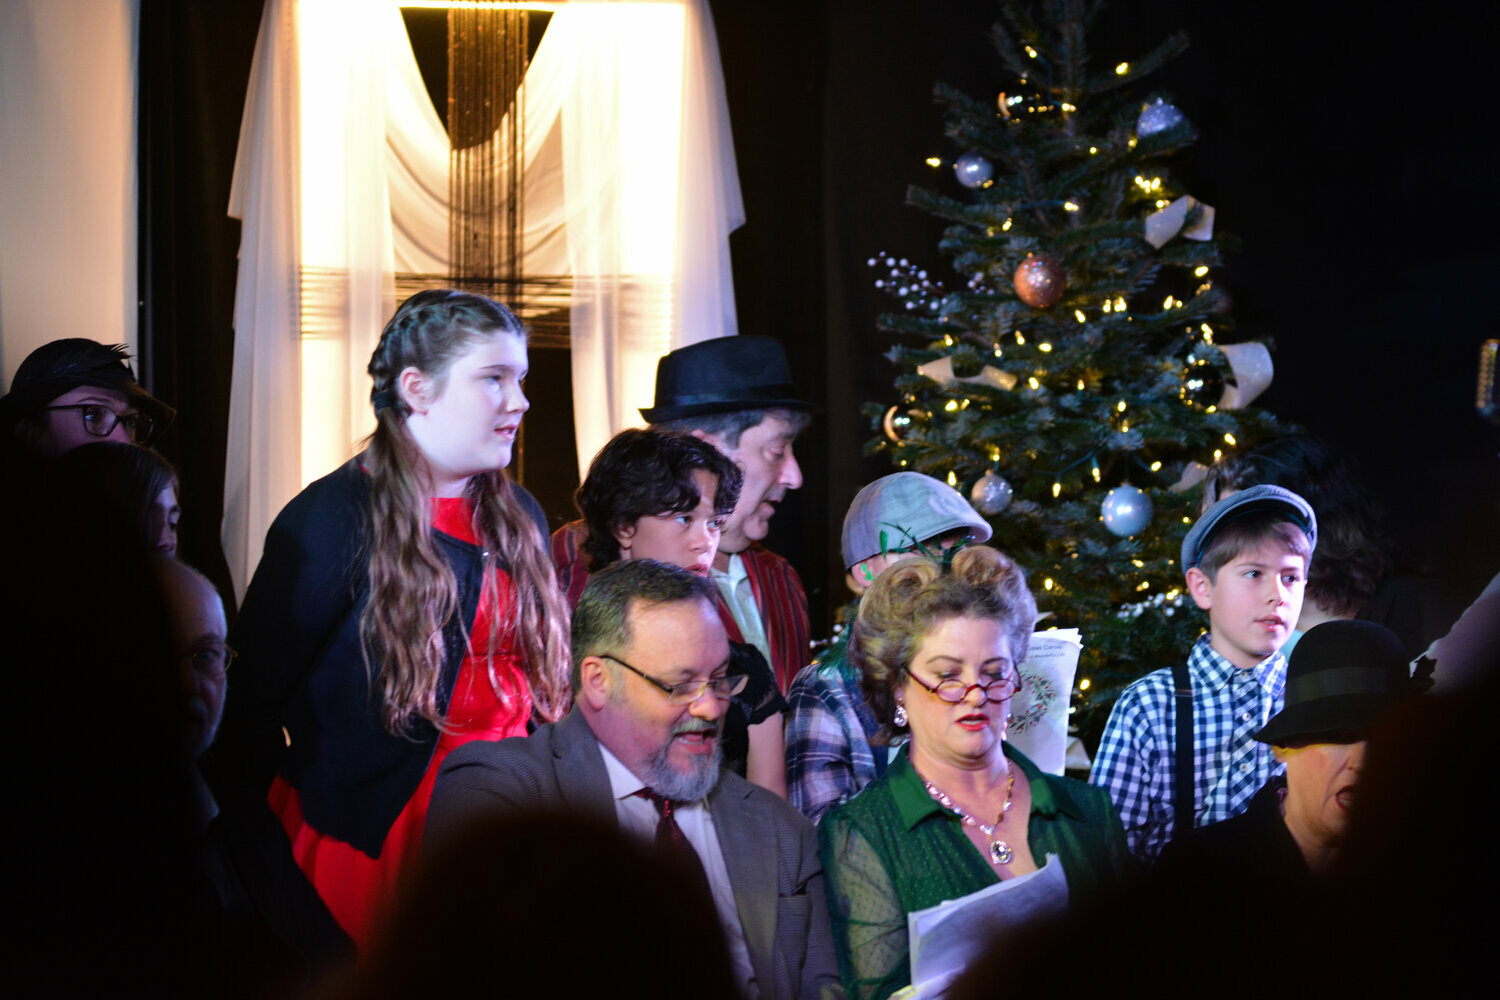 Members of the Standing Room Only Theater perform a Christmas song on Dec. 9 at Yelm’s Outpost Church during the group’s “It’s a Wonderful Life” performance.